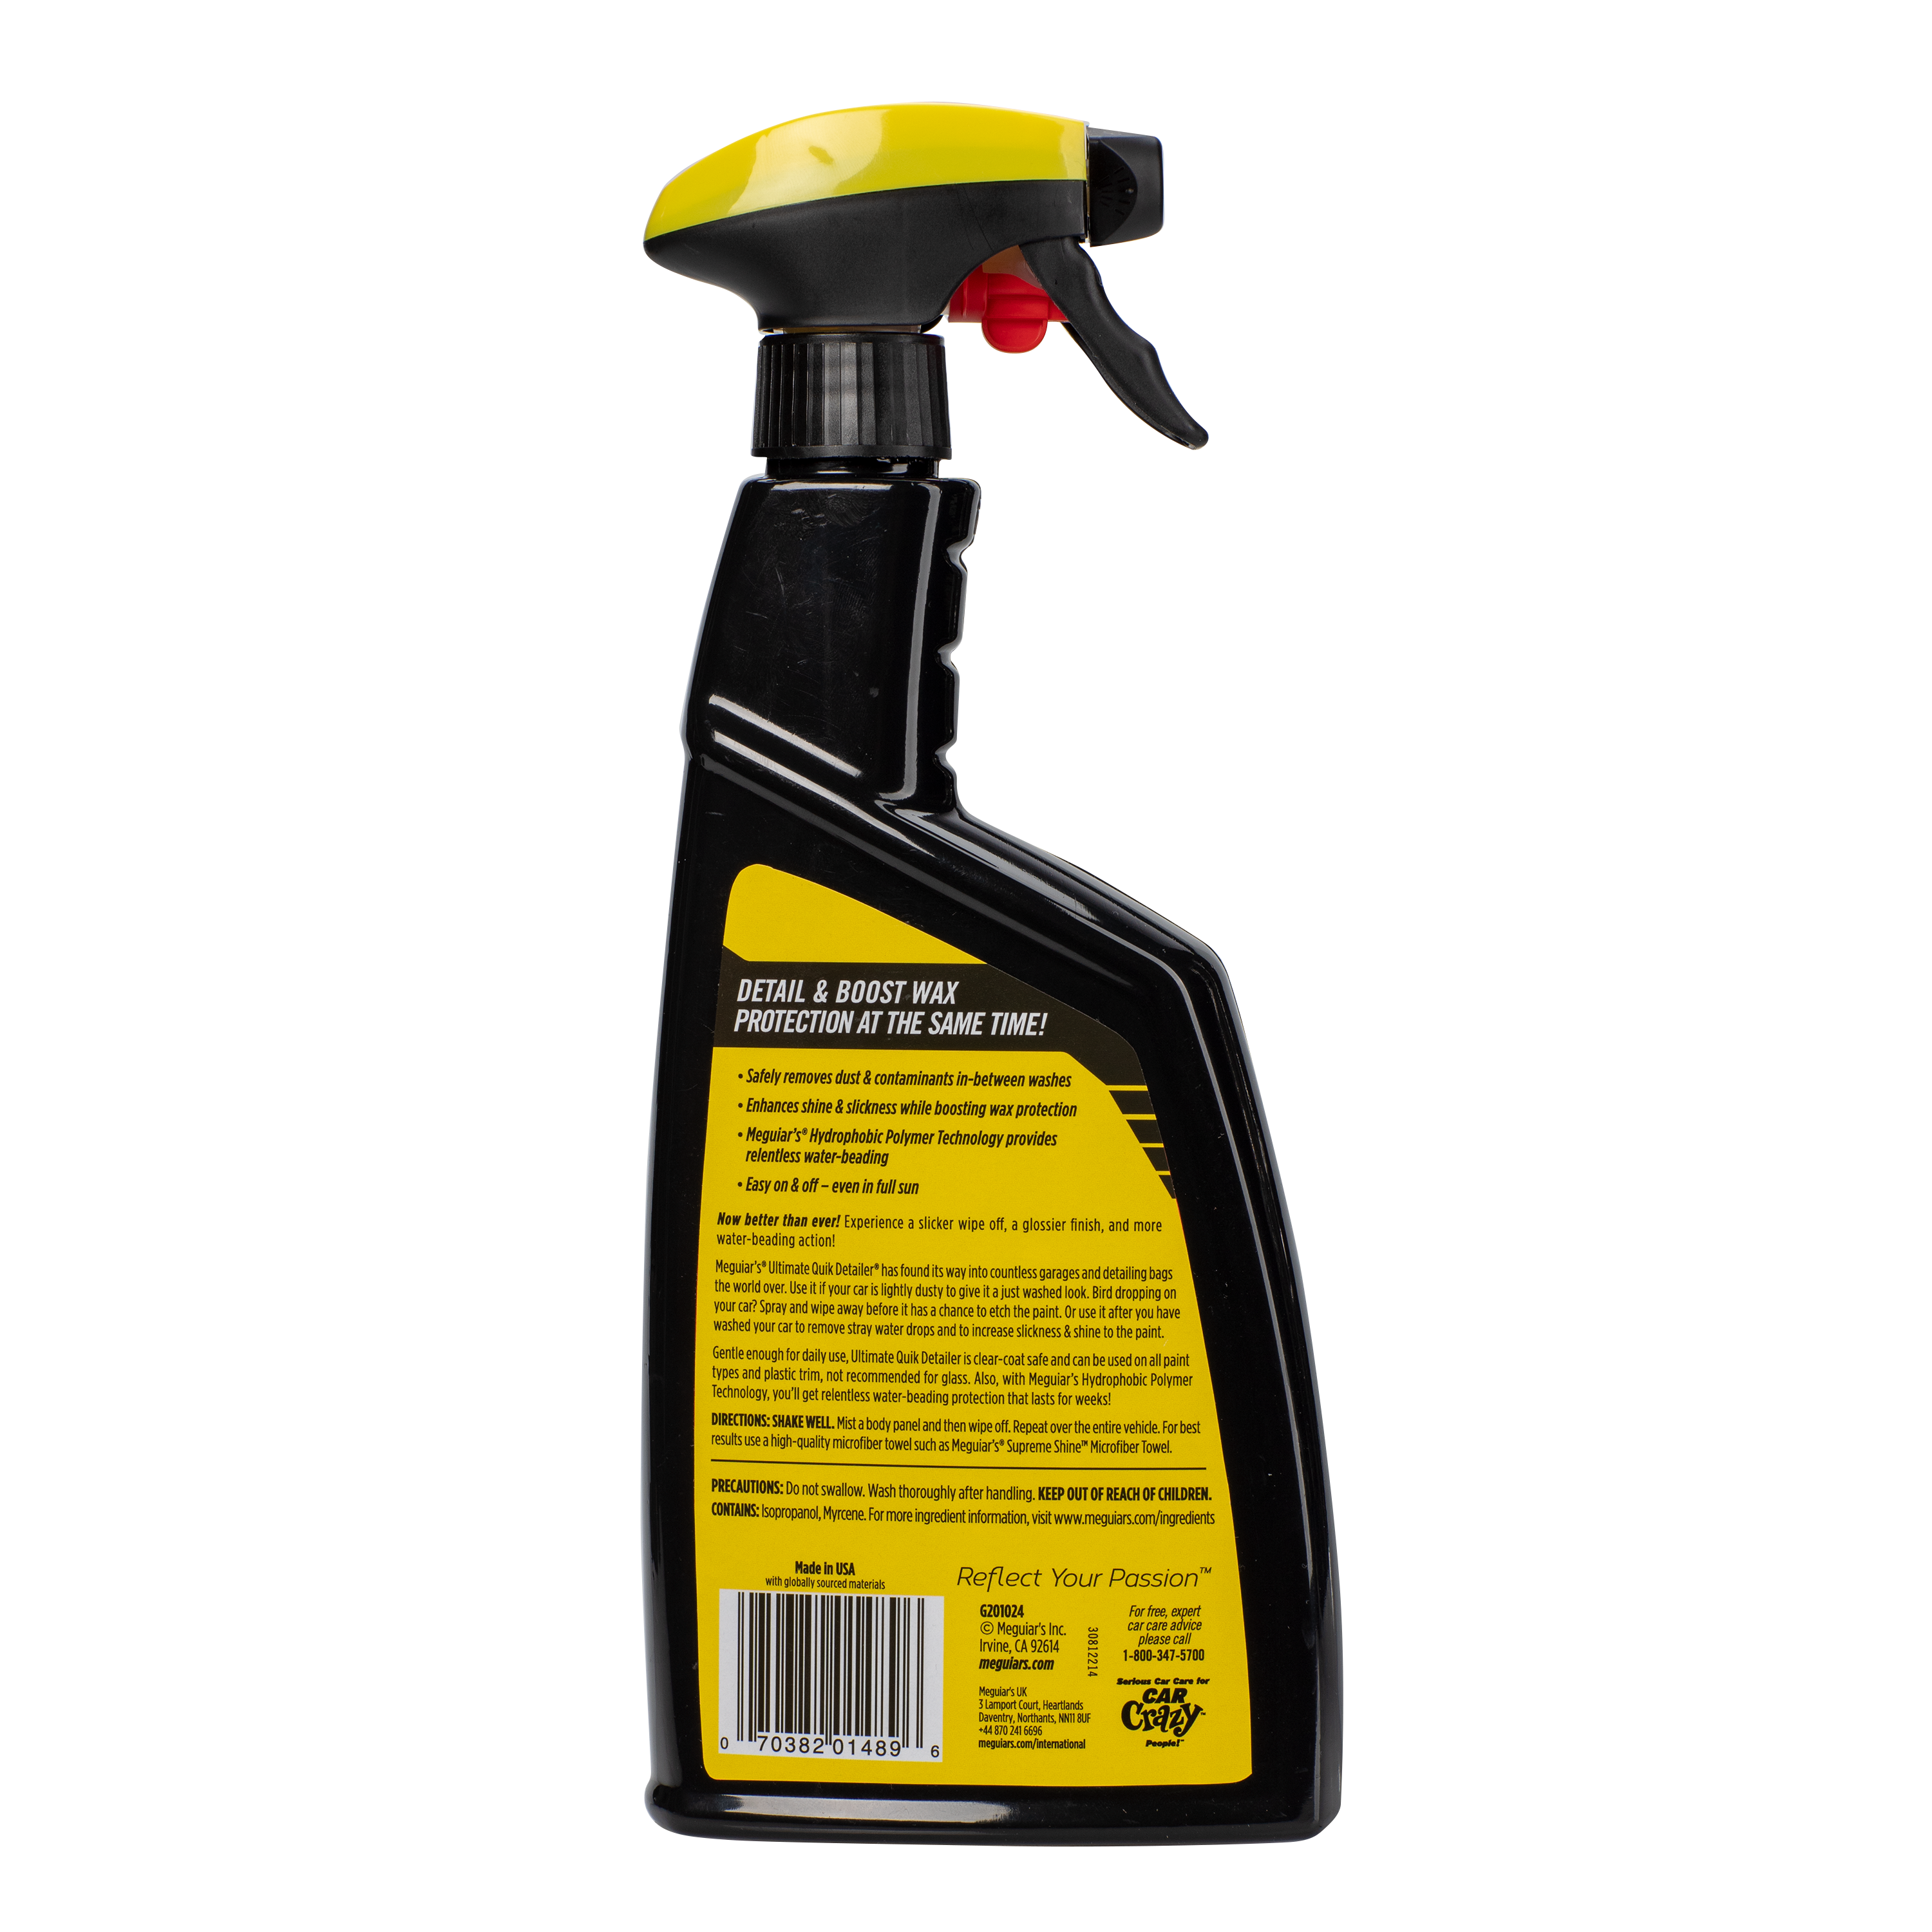 Meguiar's Ultimate Glass Cleaner & Water Repellent - Advanced Car